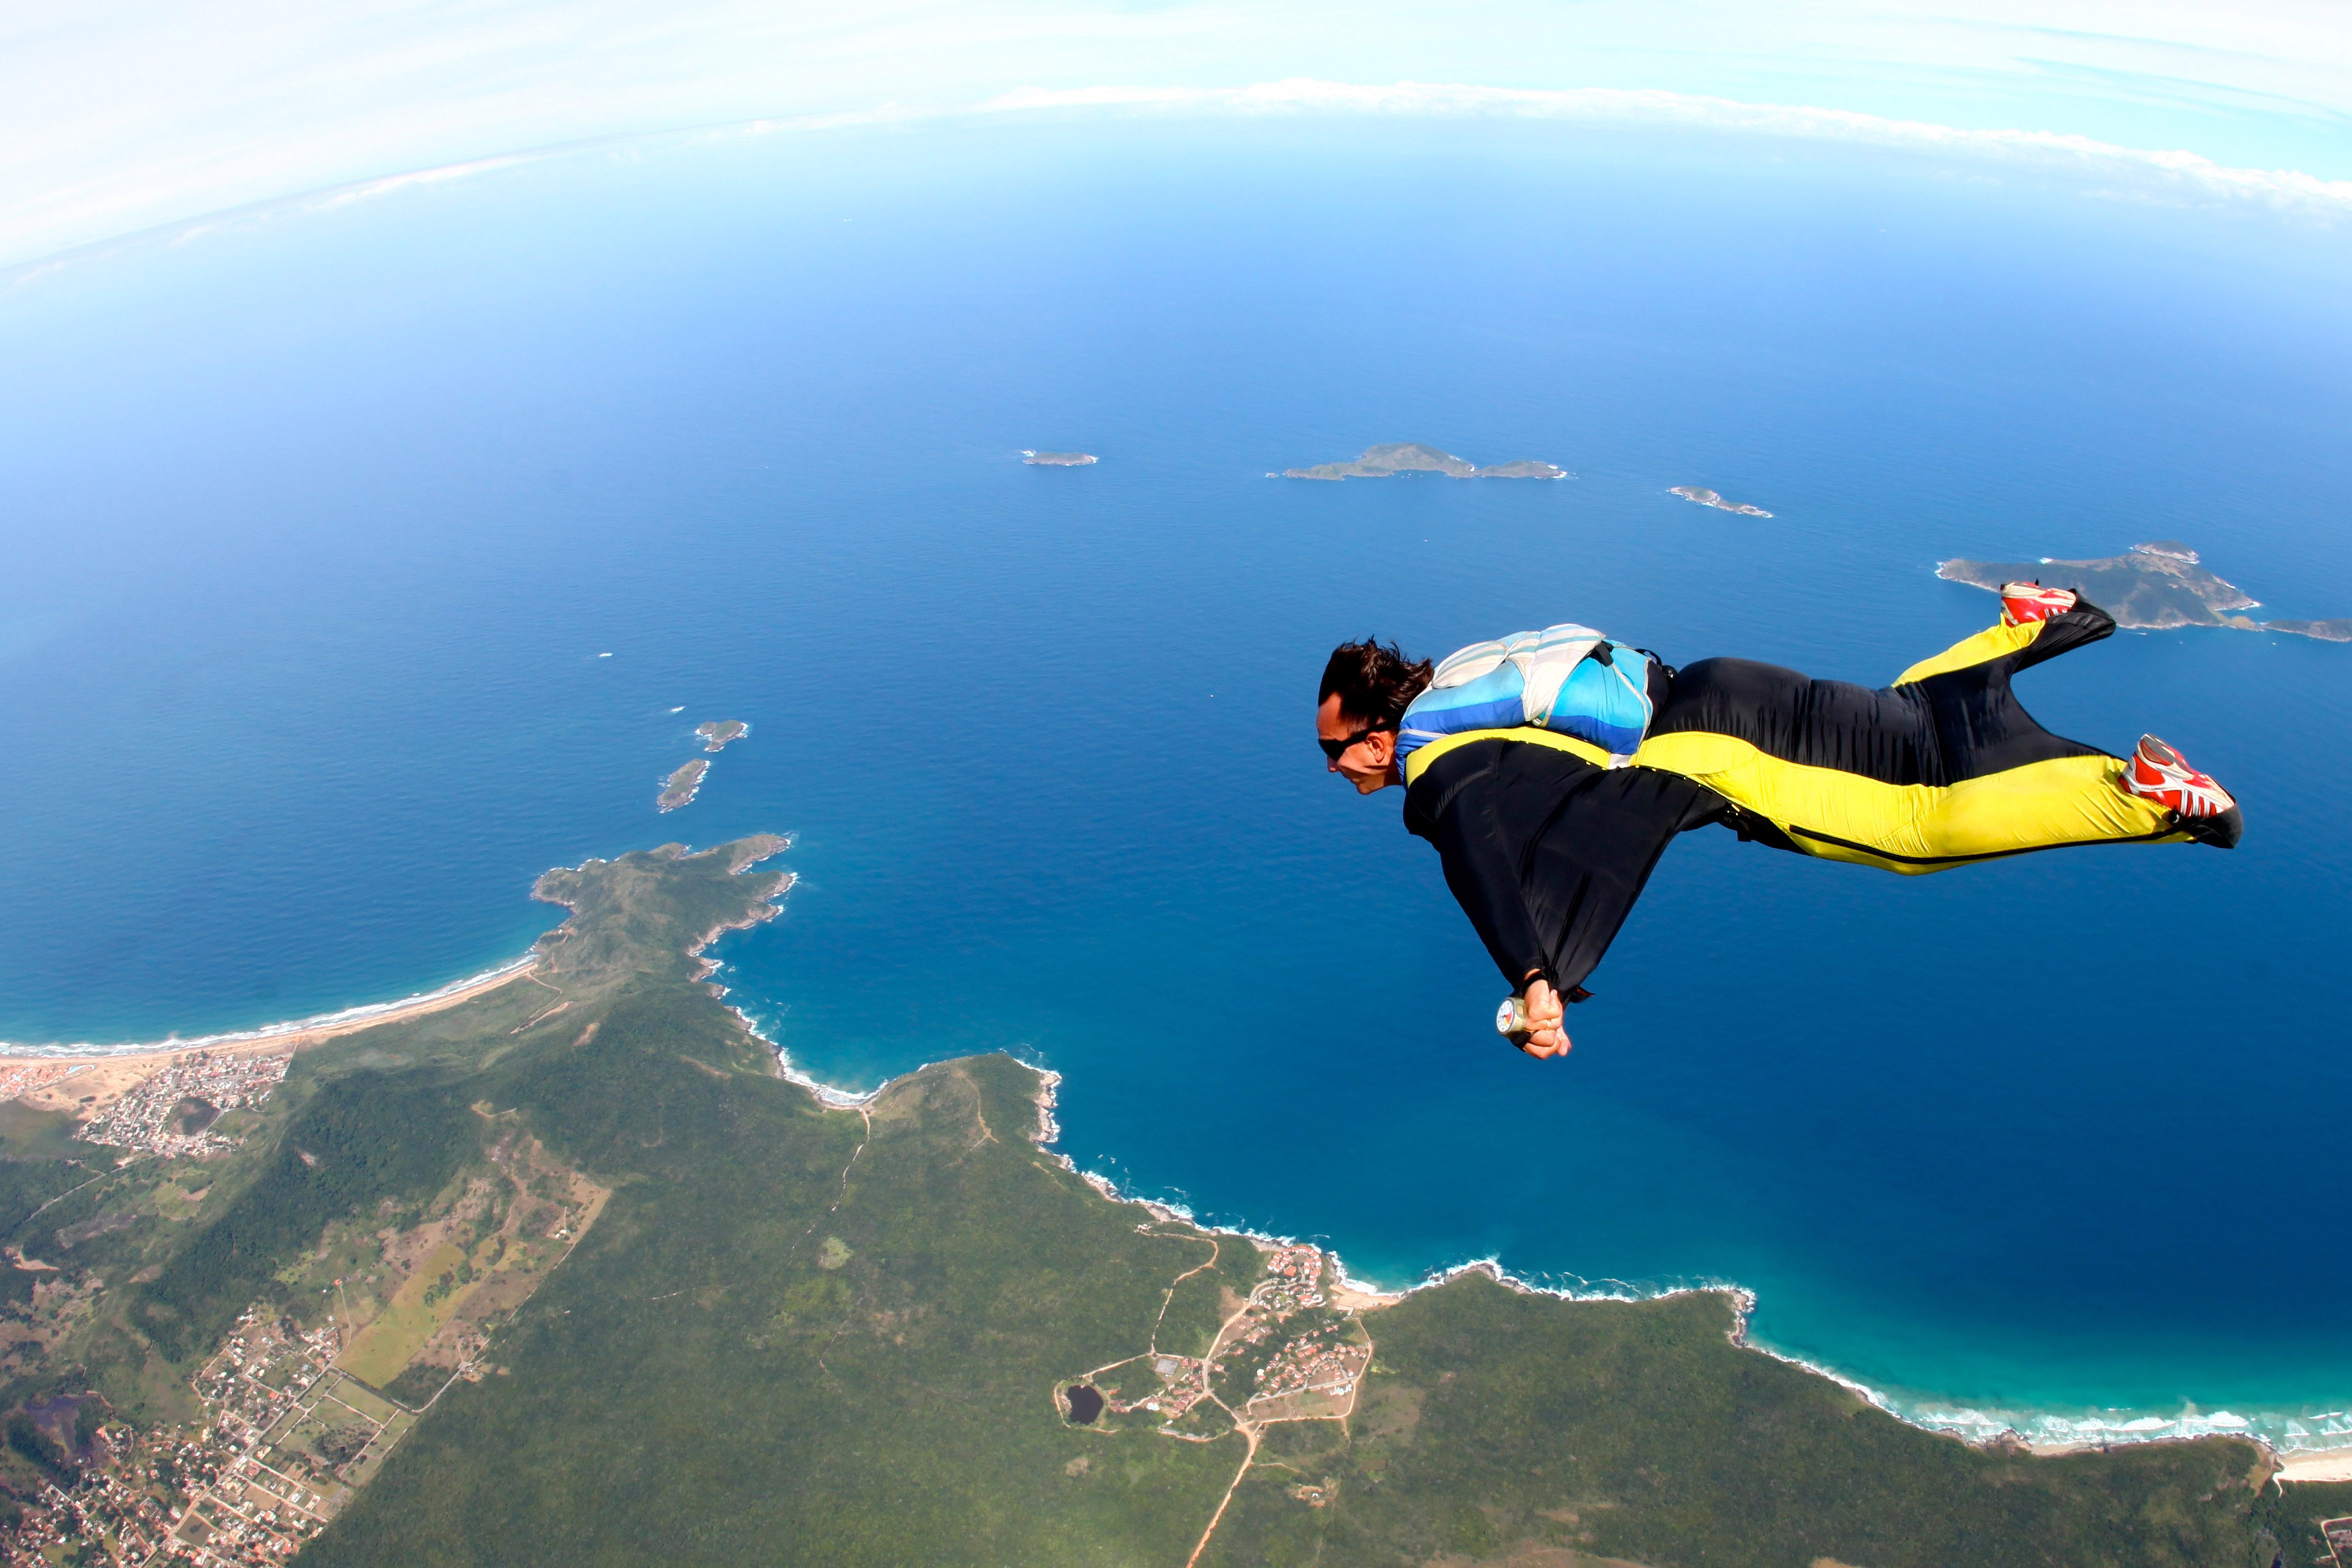 Skydive flying wing suit over beach image